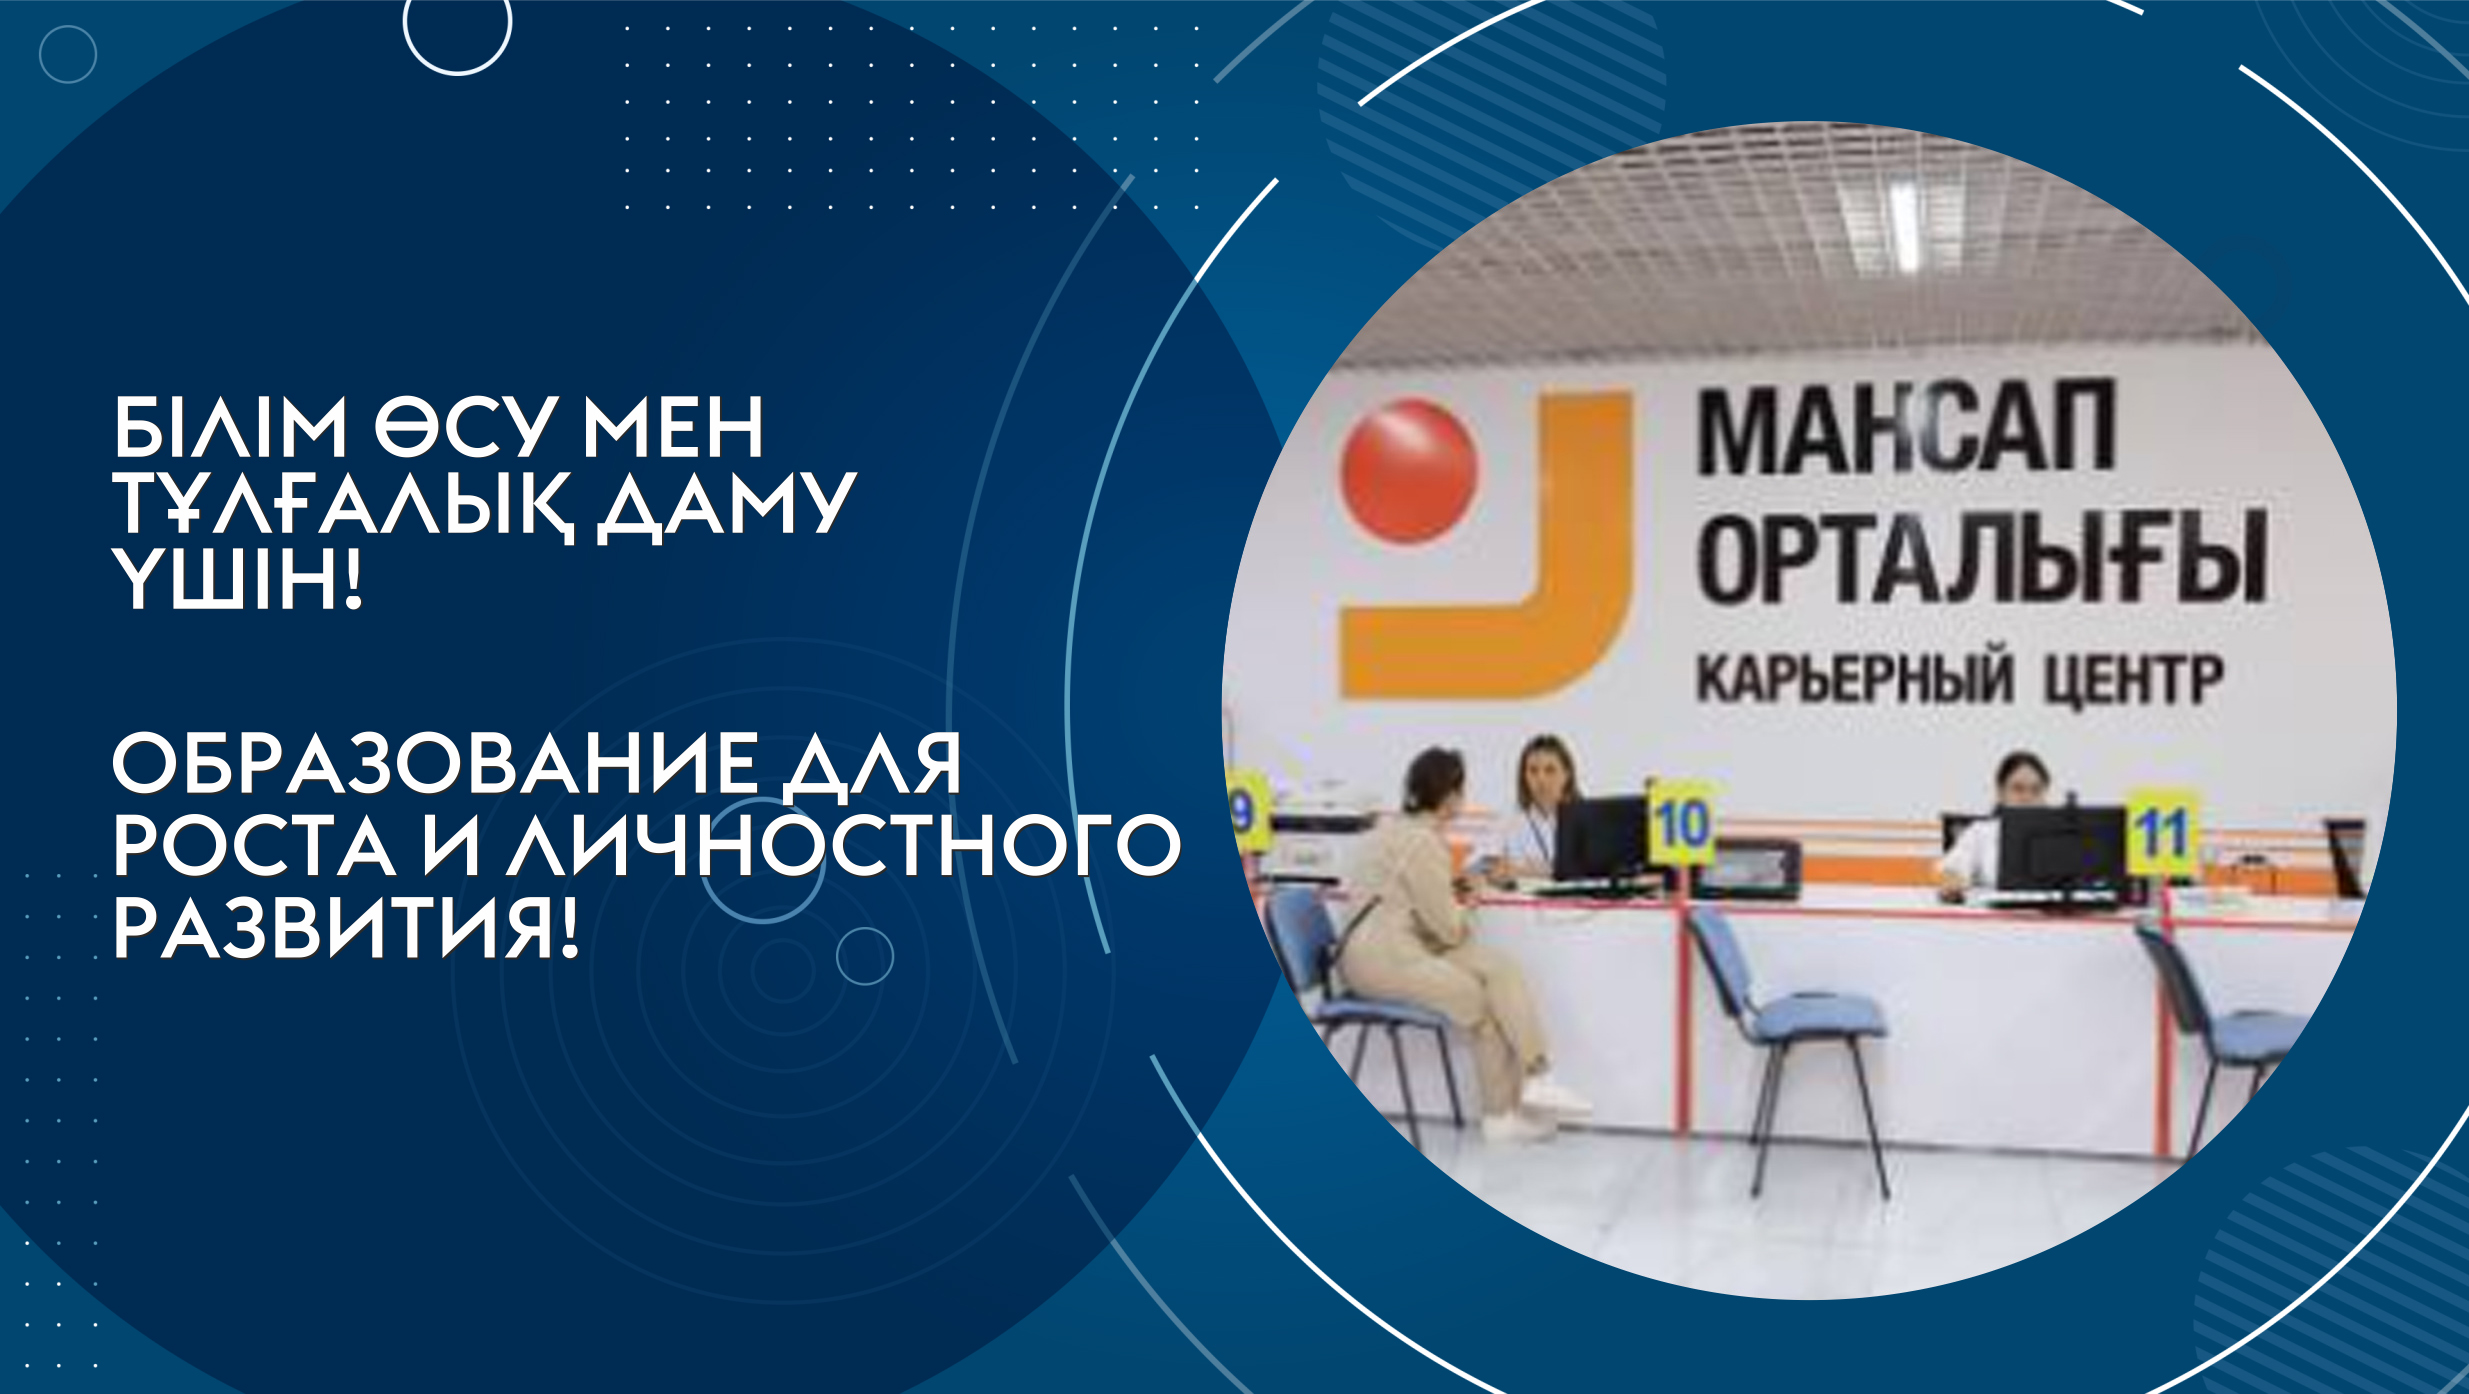 The University staff took an active part in the round table on youth employment in Karaganda